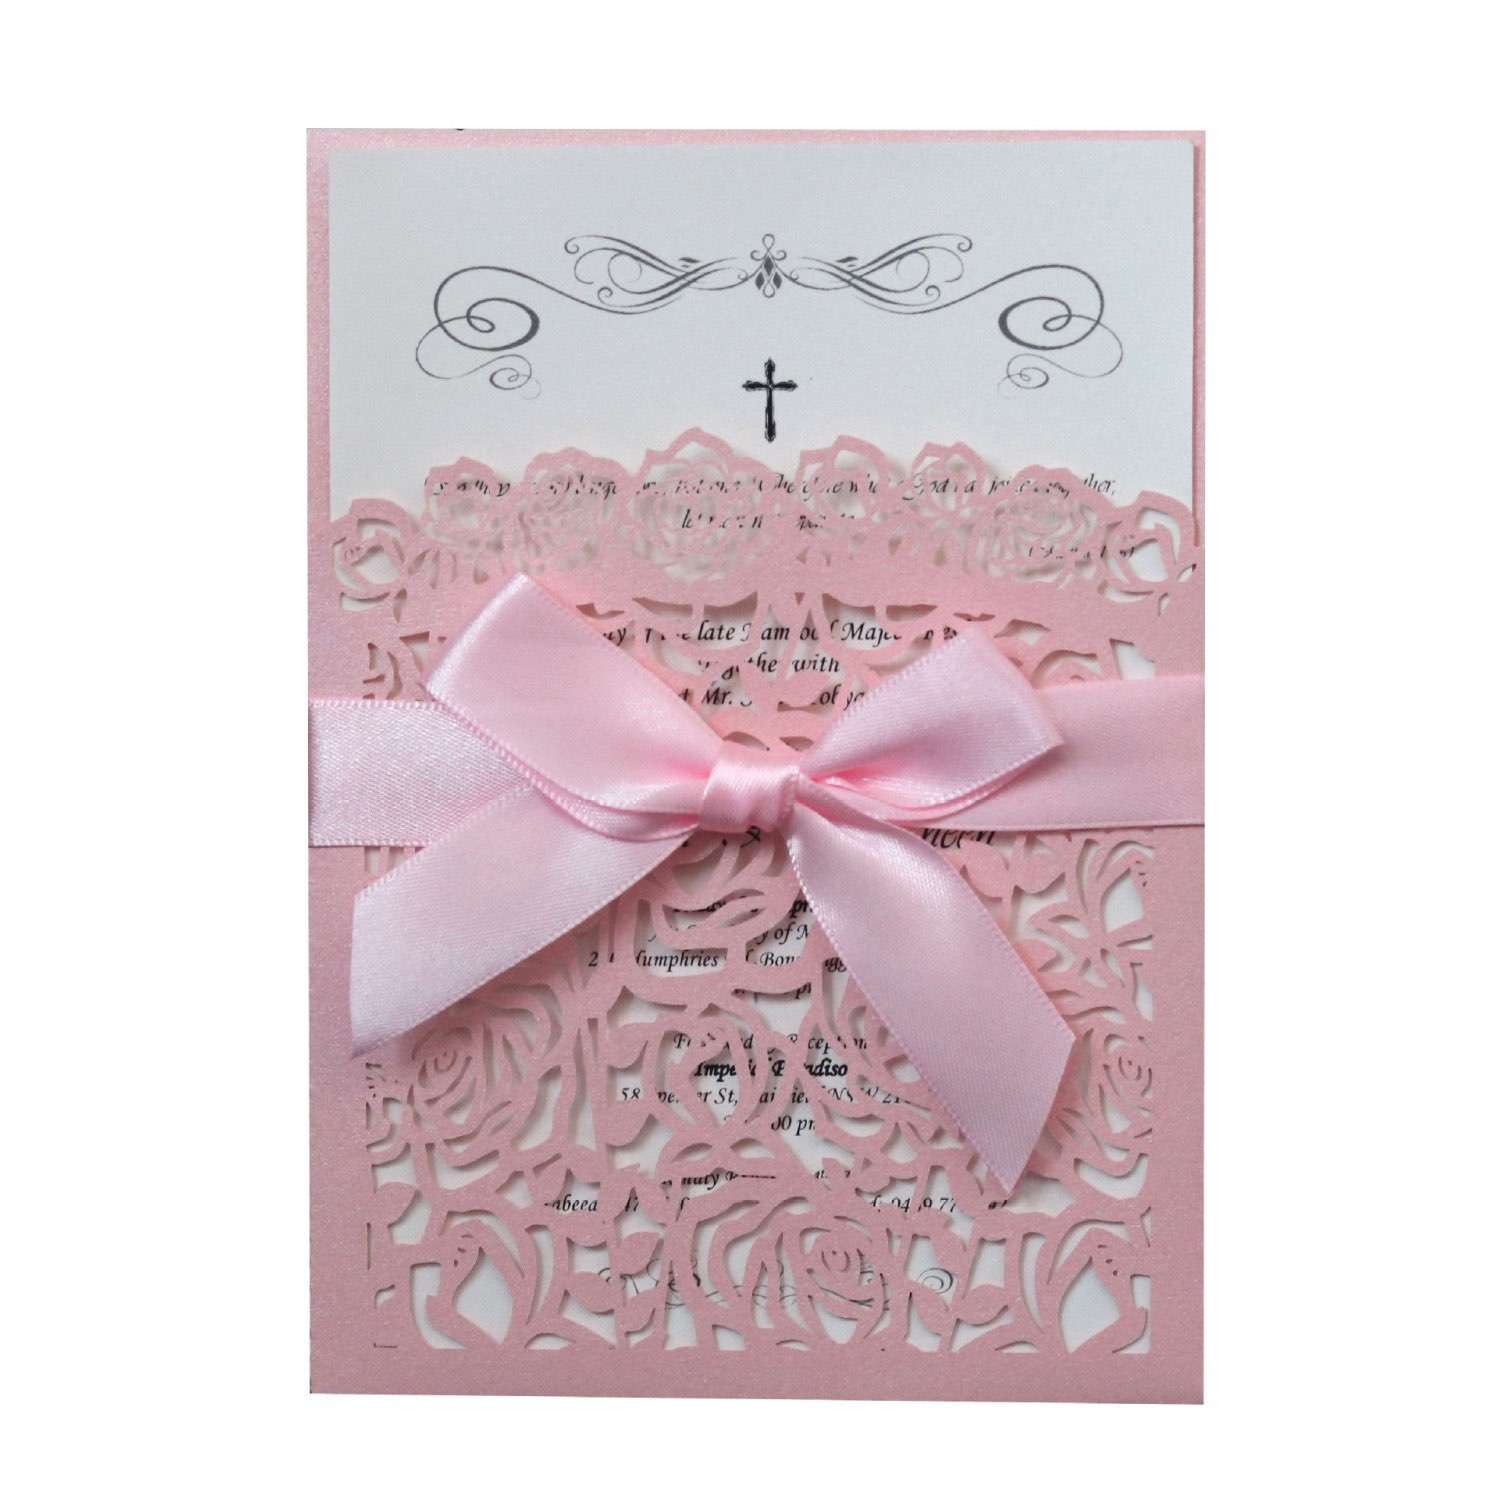 White Invitation Card with Bowknot Laser Cut Invitations  Rose Pattern